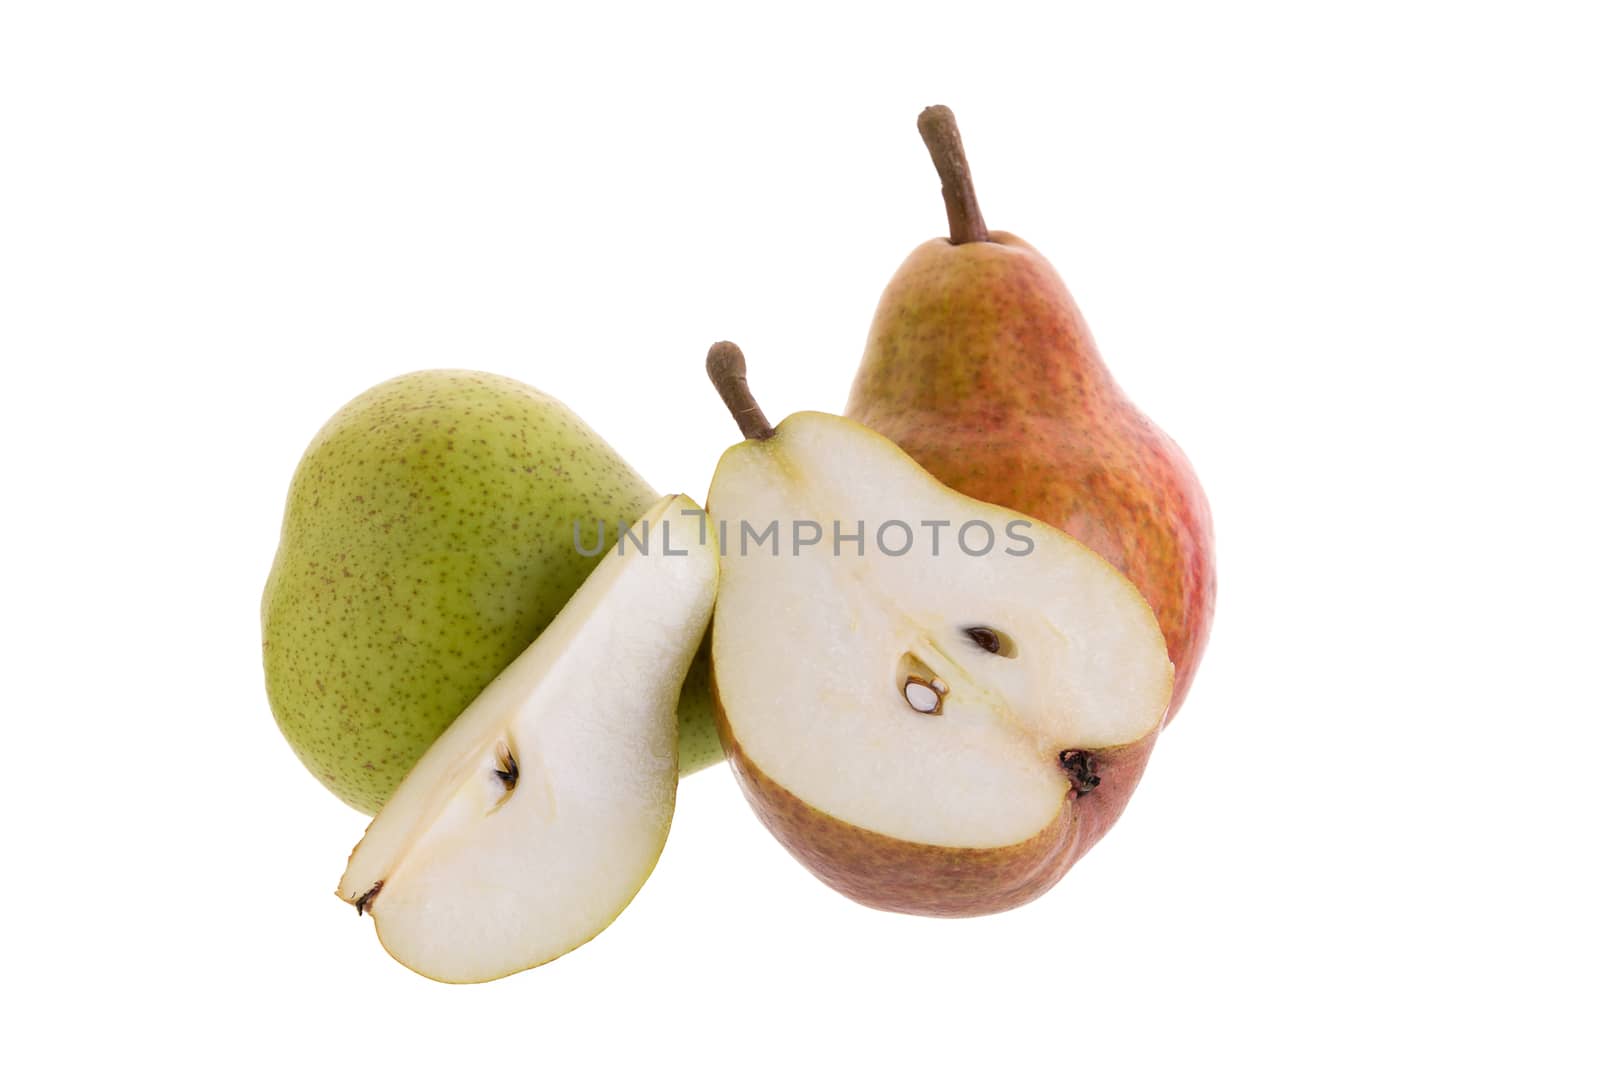 Ripe green and red pears isolated on a white background.